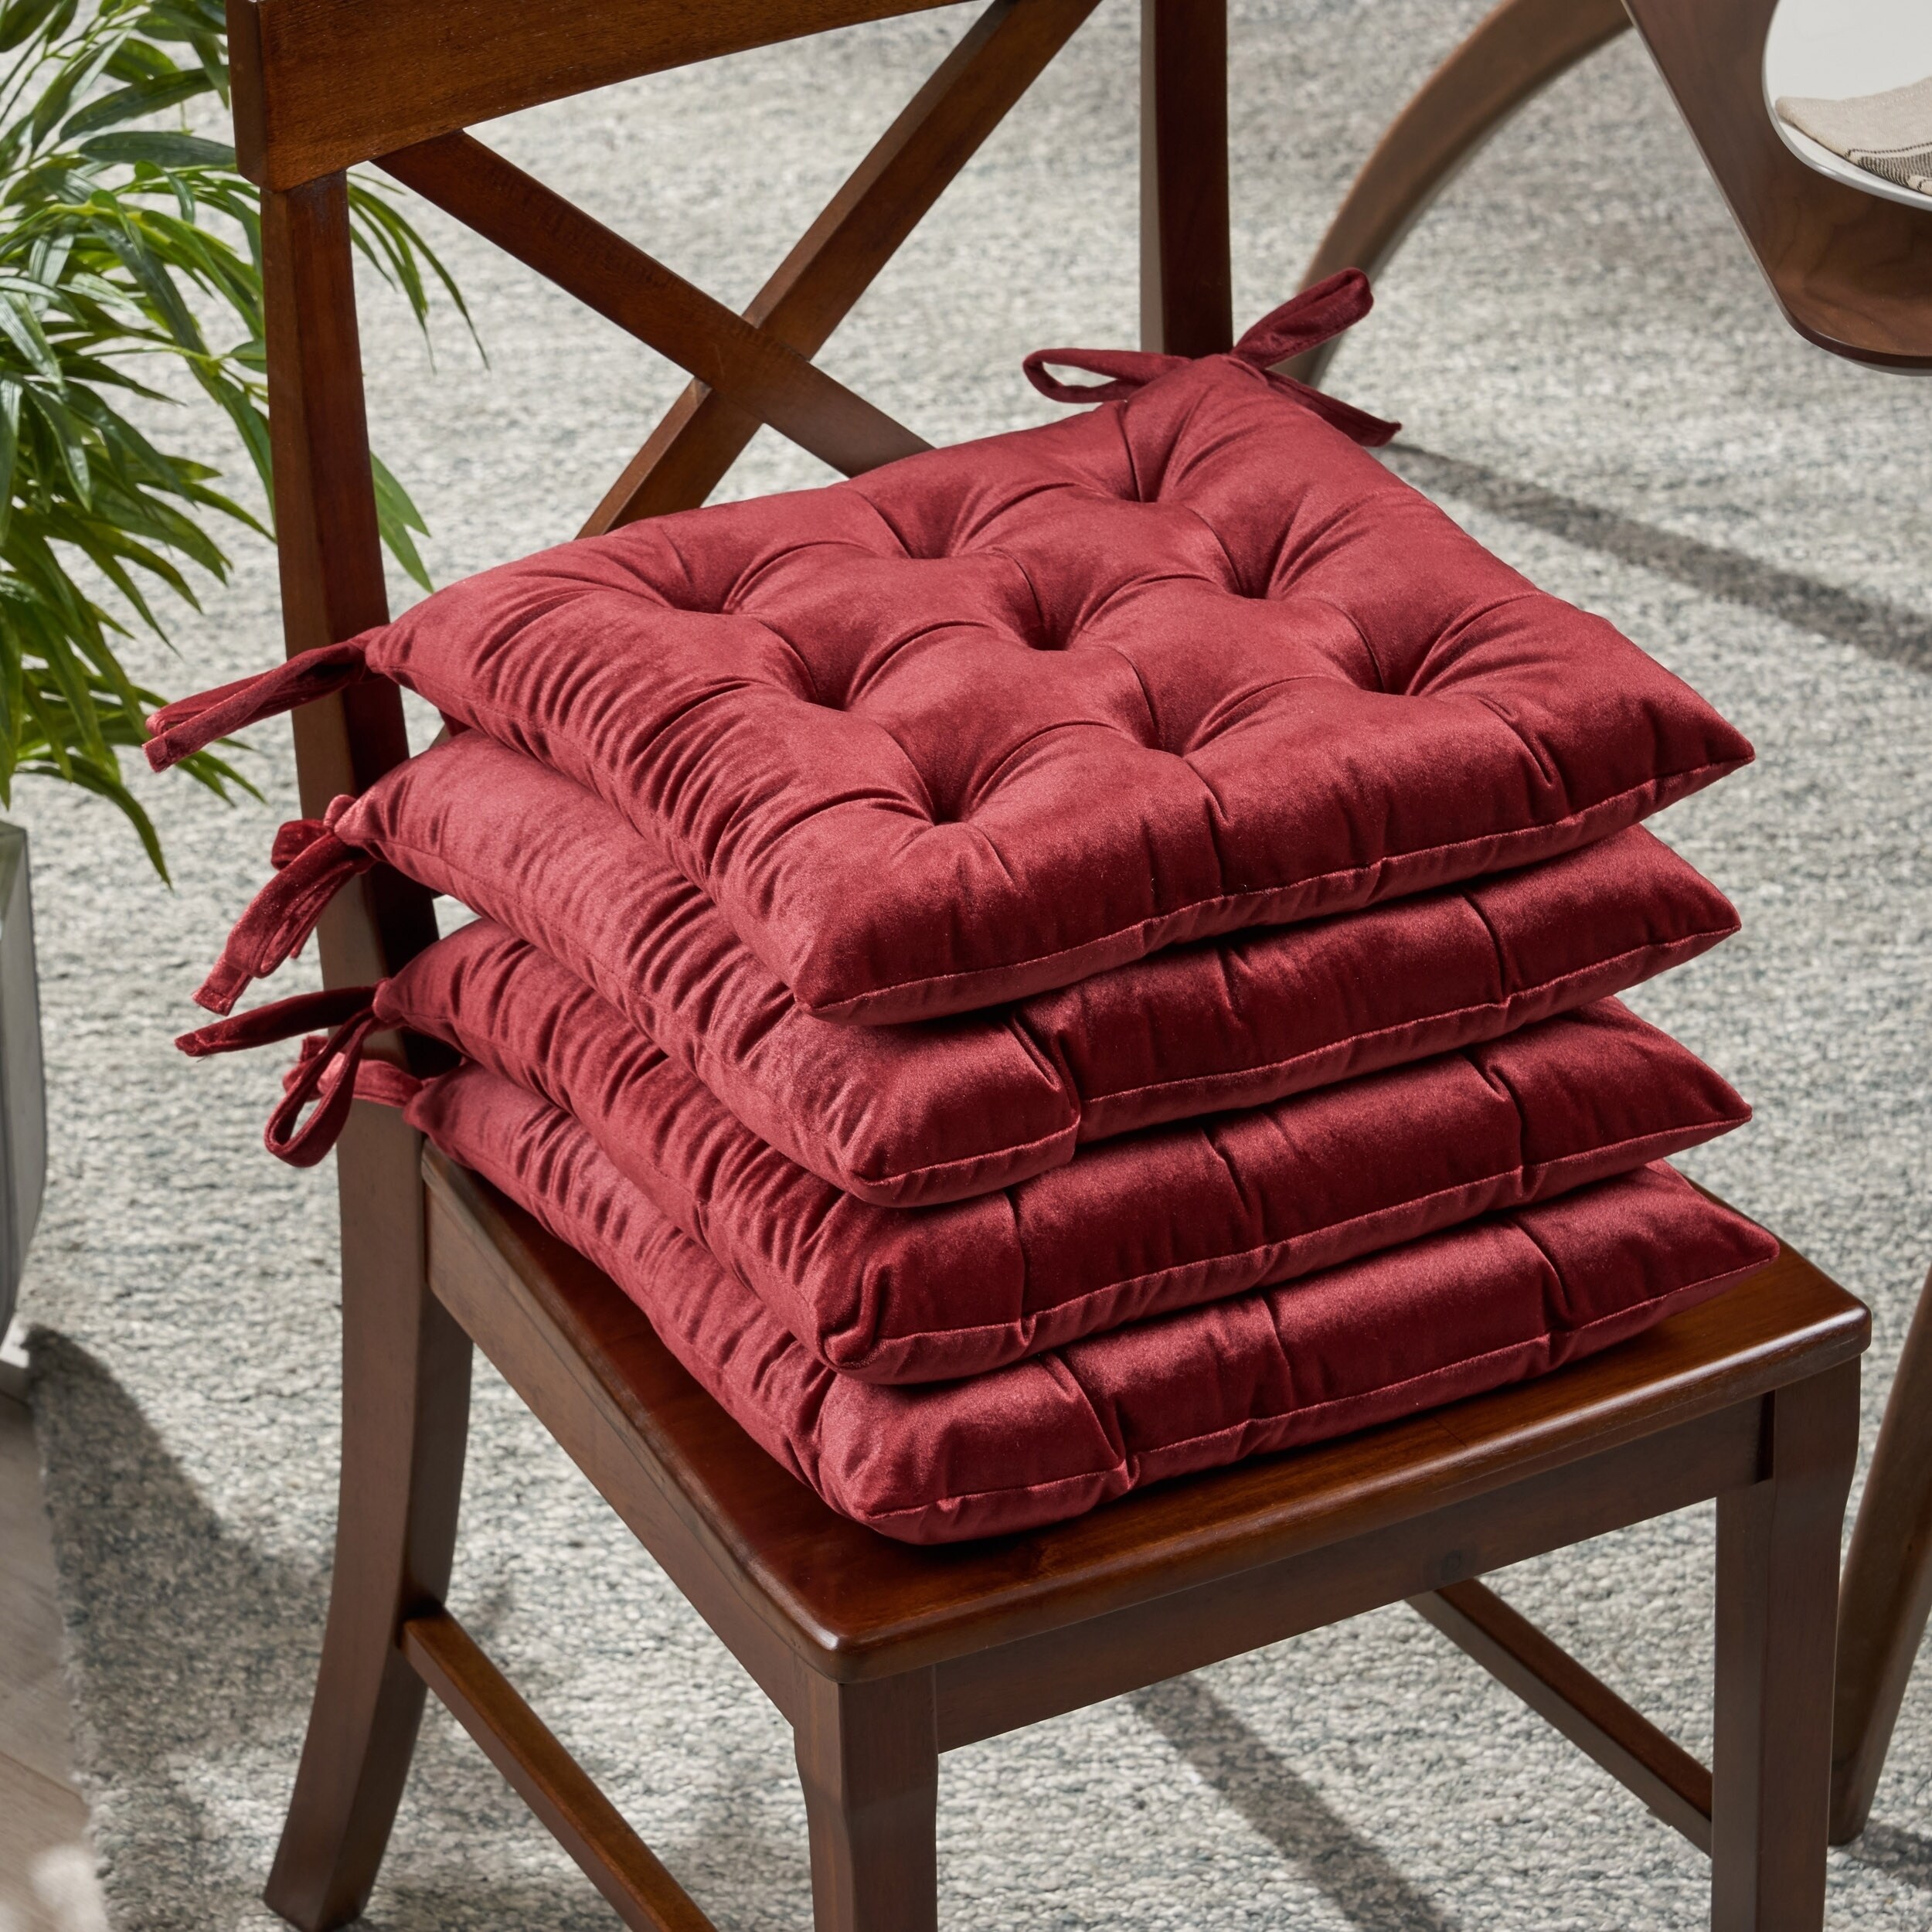 https://ak1.ostkcdn.com/images/products/29008405/Foxhall-Tufted-Velvet-Dining-Chair-Cushions-Set-of-4-by-Christopher-Knight-Home-56f81188-1f85-4eaf-b55d-cf1671215720.jpg